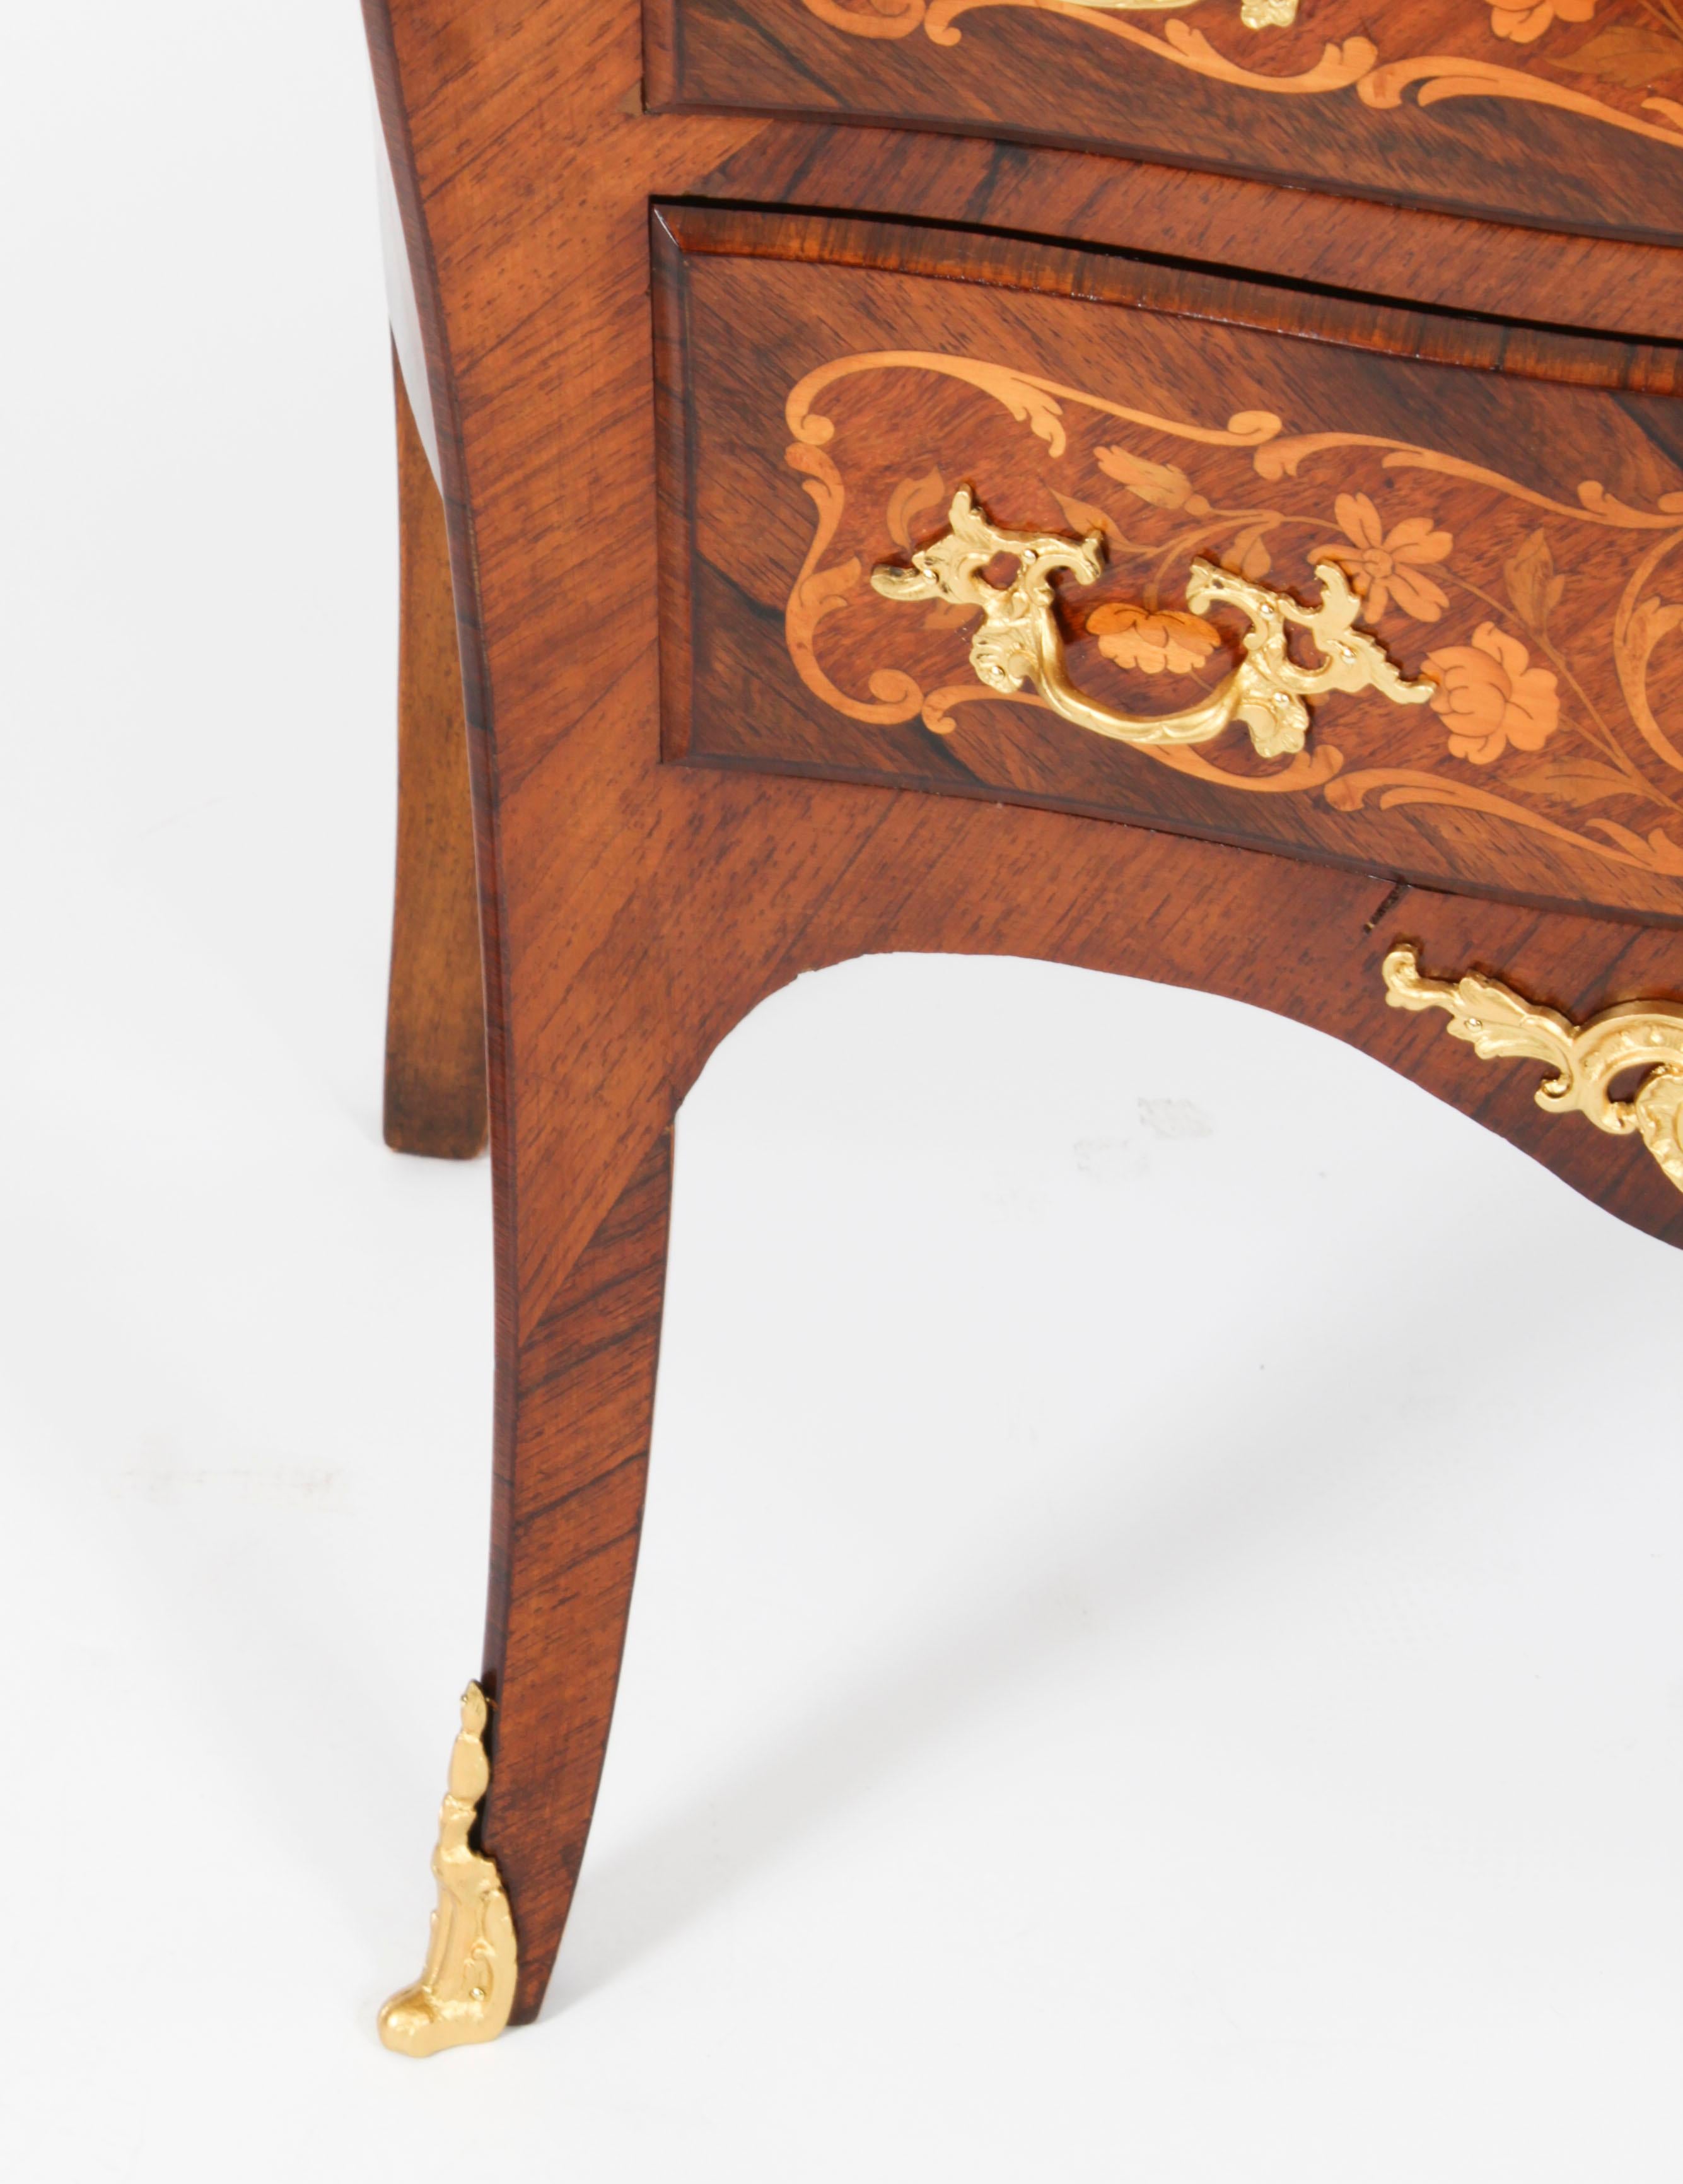 Antique French Louis Revival Gonçalo Alvest Marquetry Commode 19th Century For Sale 4